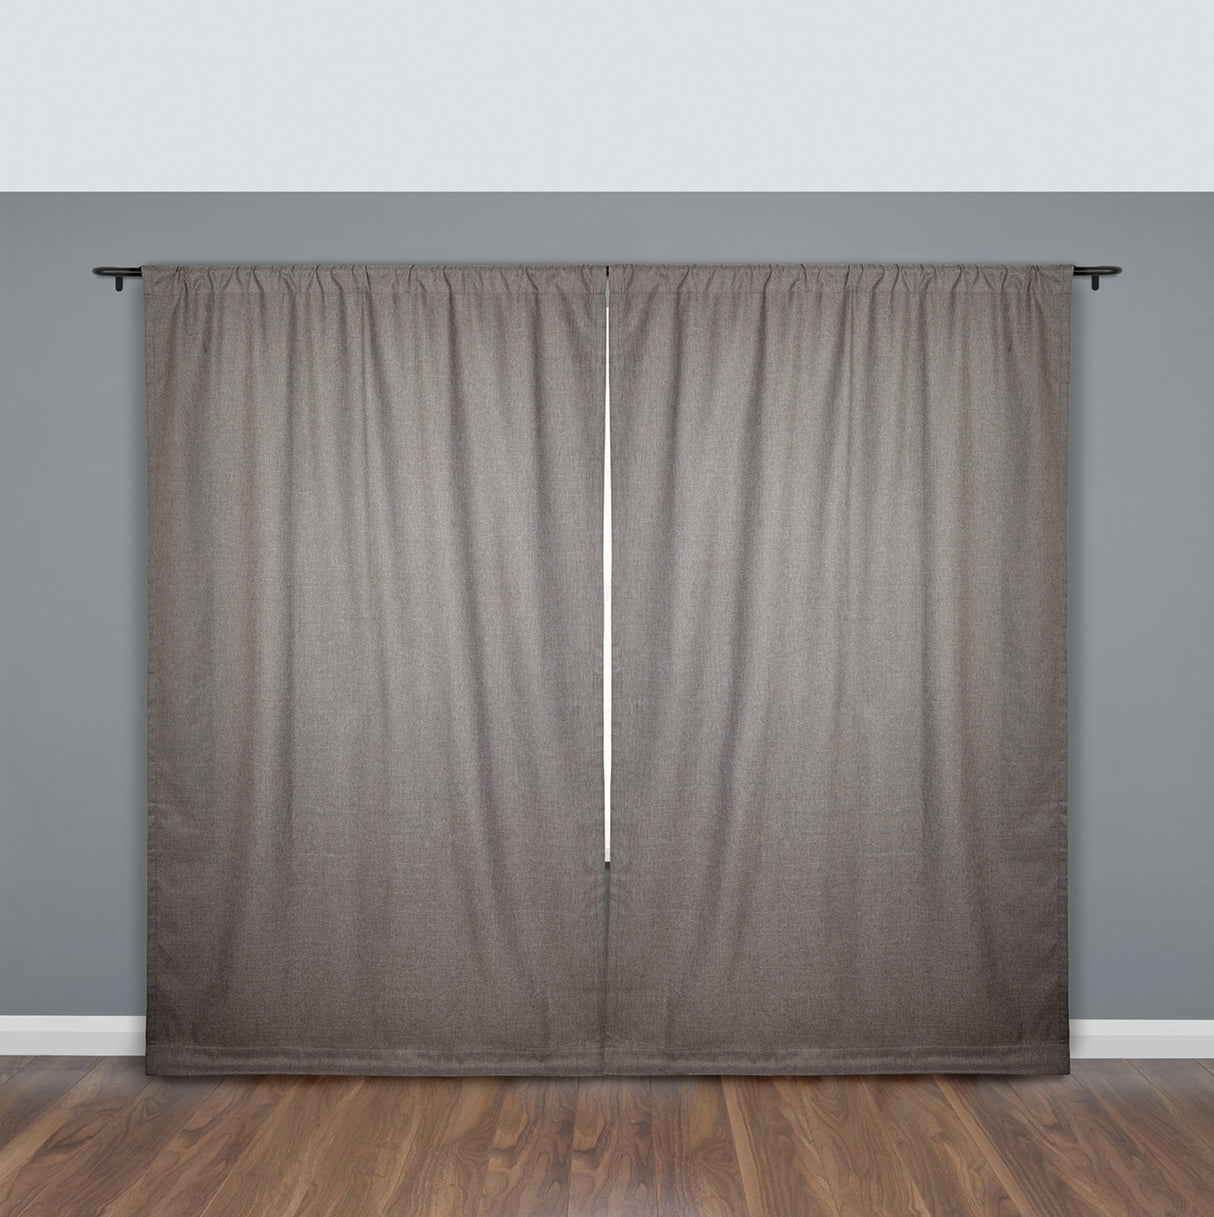 Muamar Velcro Blackout Curtains for Bedroom 2 Panels with Tiebacks(Black,  34 W x 45 L),Without Rods Small Curtains,Kitchen Curtains,Easy Install  for